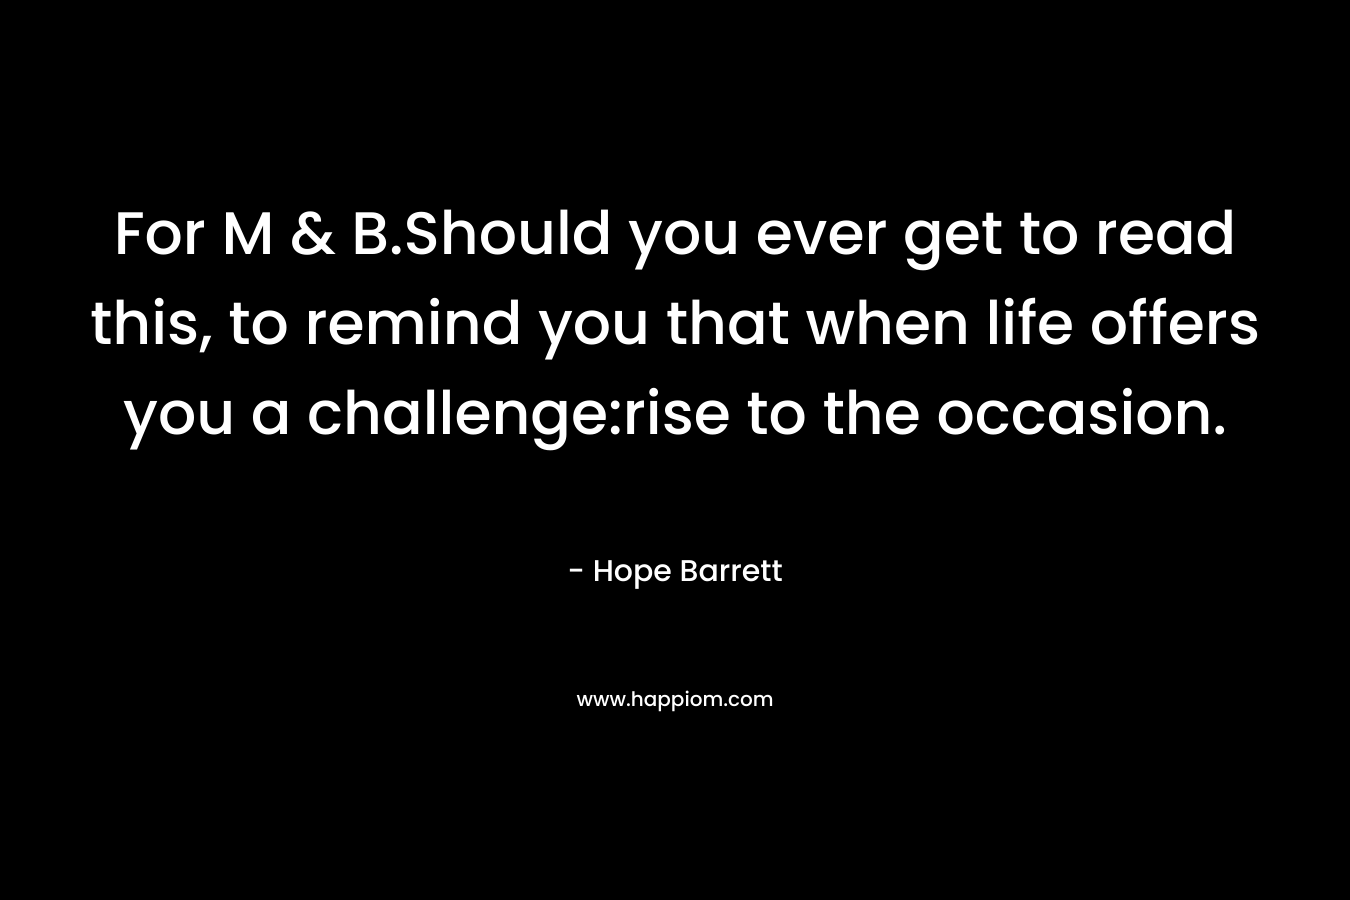 For M & B.Should you ever get to read this, to remind you that when life offers you a challenge:rise to the occasion. – Hope Barrett